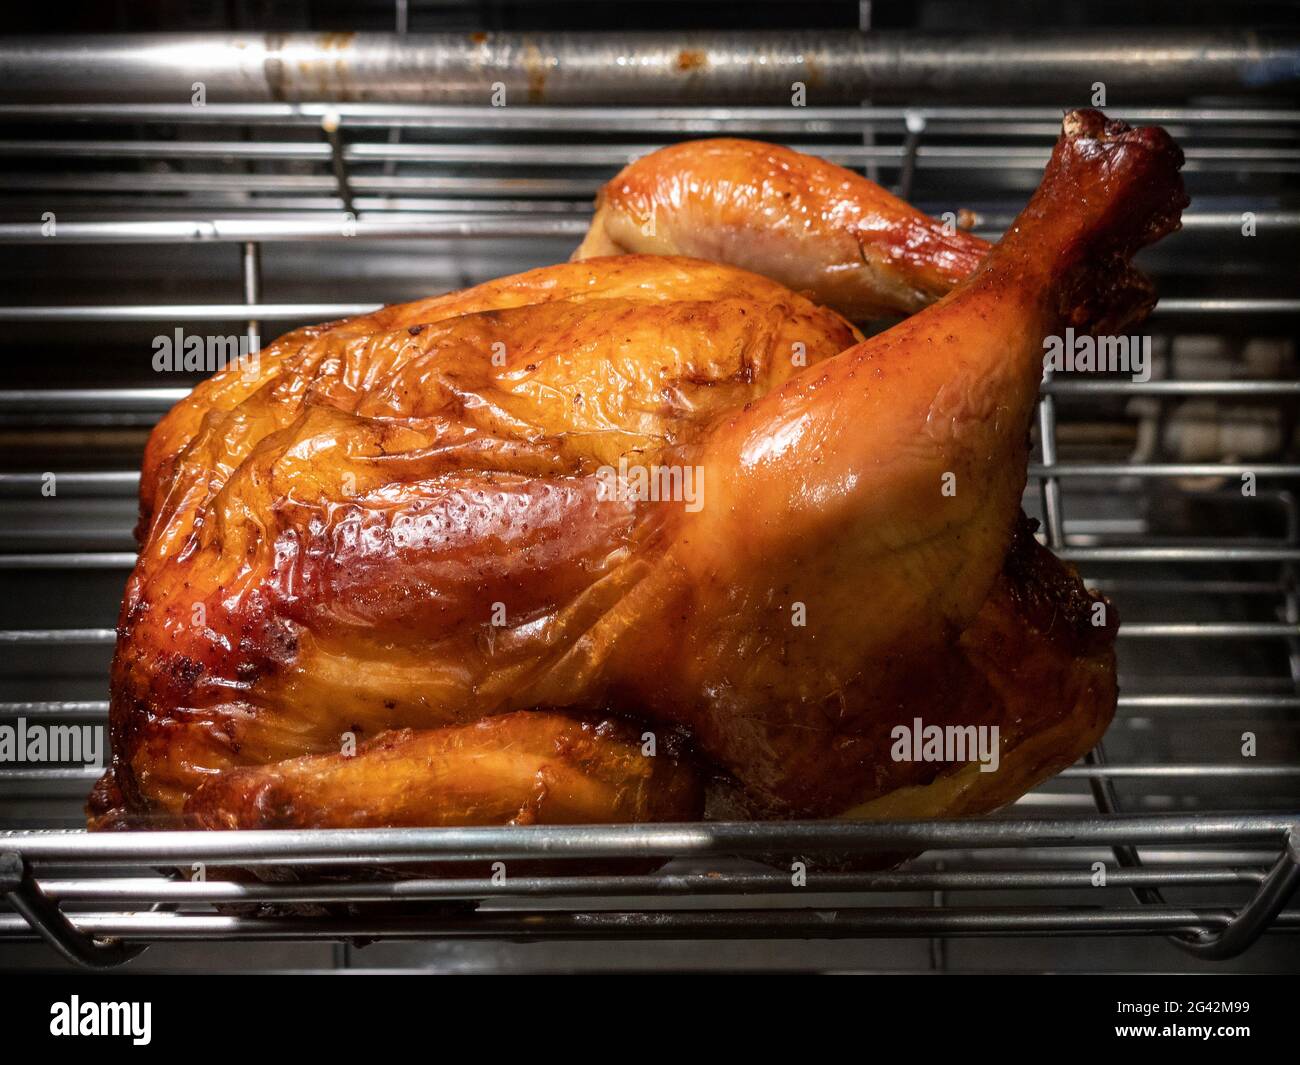 https://c8.alamy.com/comp/2G42M99/rotating-machine-are-grilled-whole-chicken-roasted-chickens-in-a-row-turning-at-industrial-roaster-a-barbecue-roast-skewer-in-a-commercial-oven-roti-2G42M99.jpg